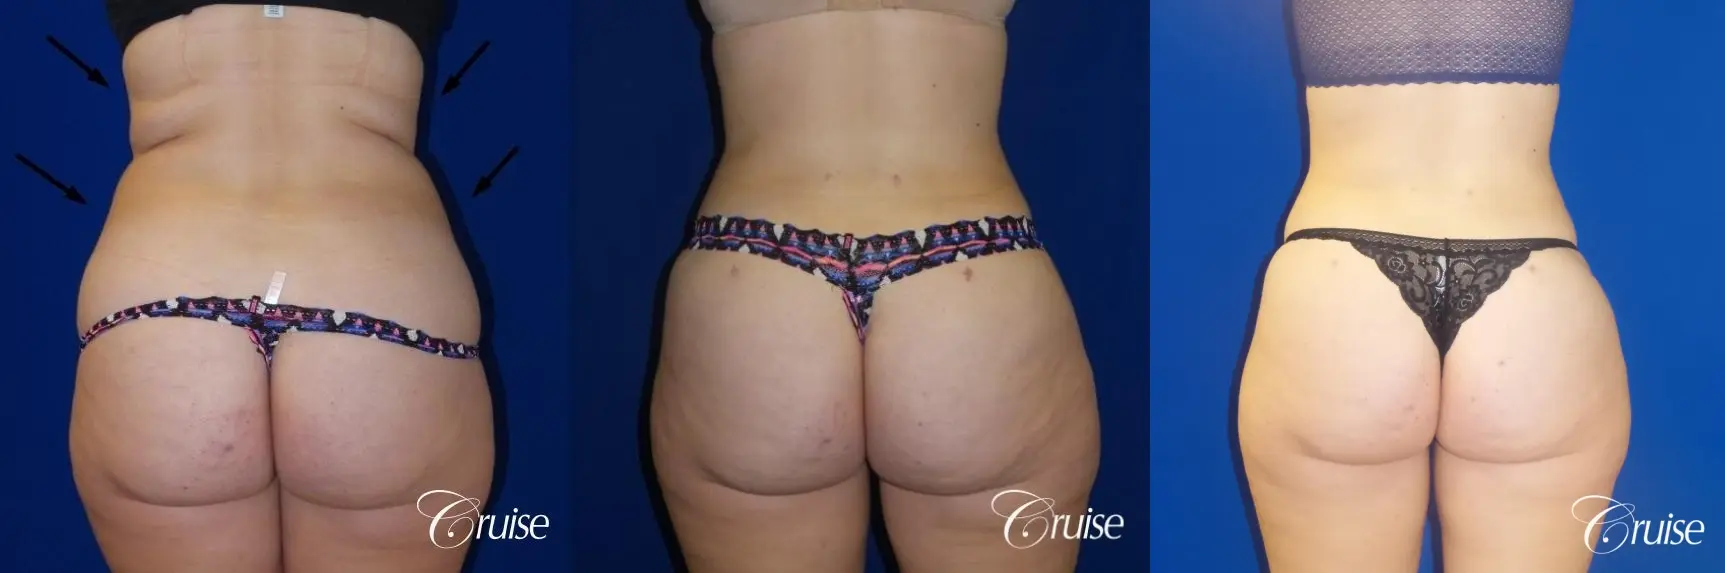 Liposuction Flanks & Abdomen - Before and After 2